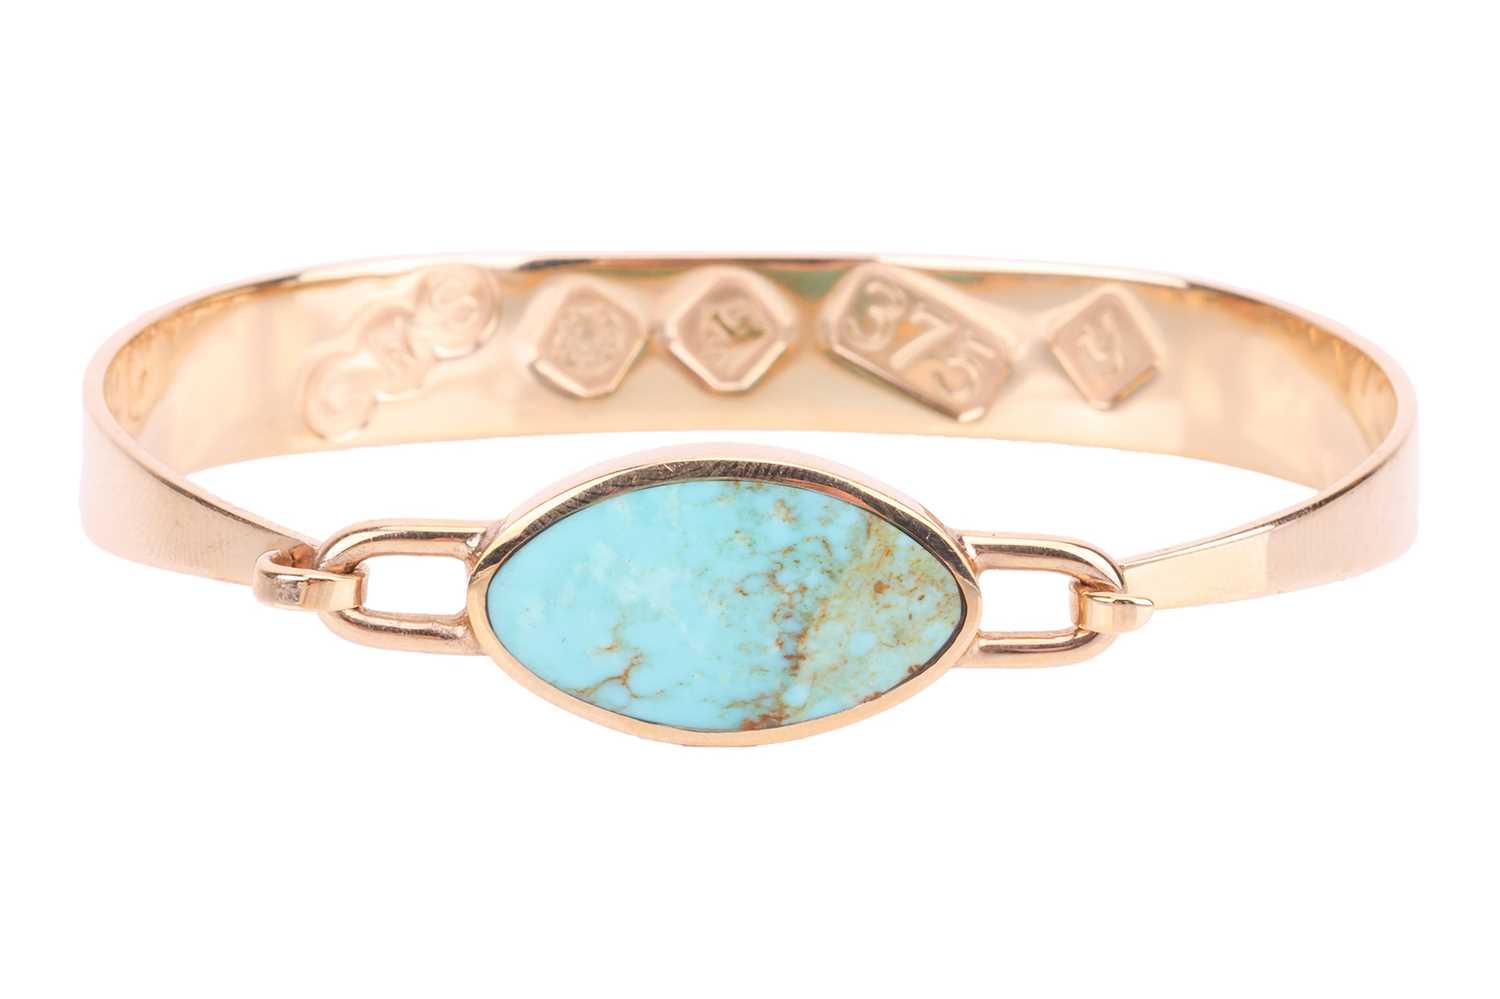 A turquoise-set bangle in 9ct yellow gold, tension clamp opening bracelet featuring a navette-shaped